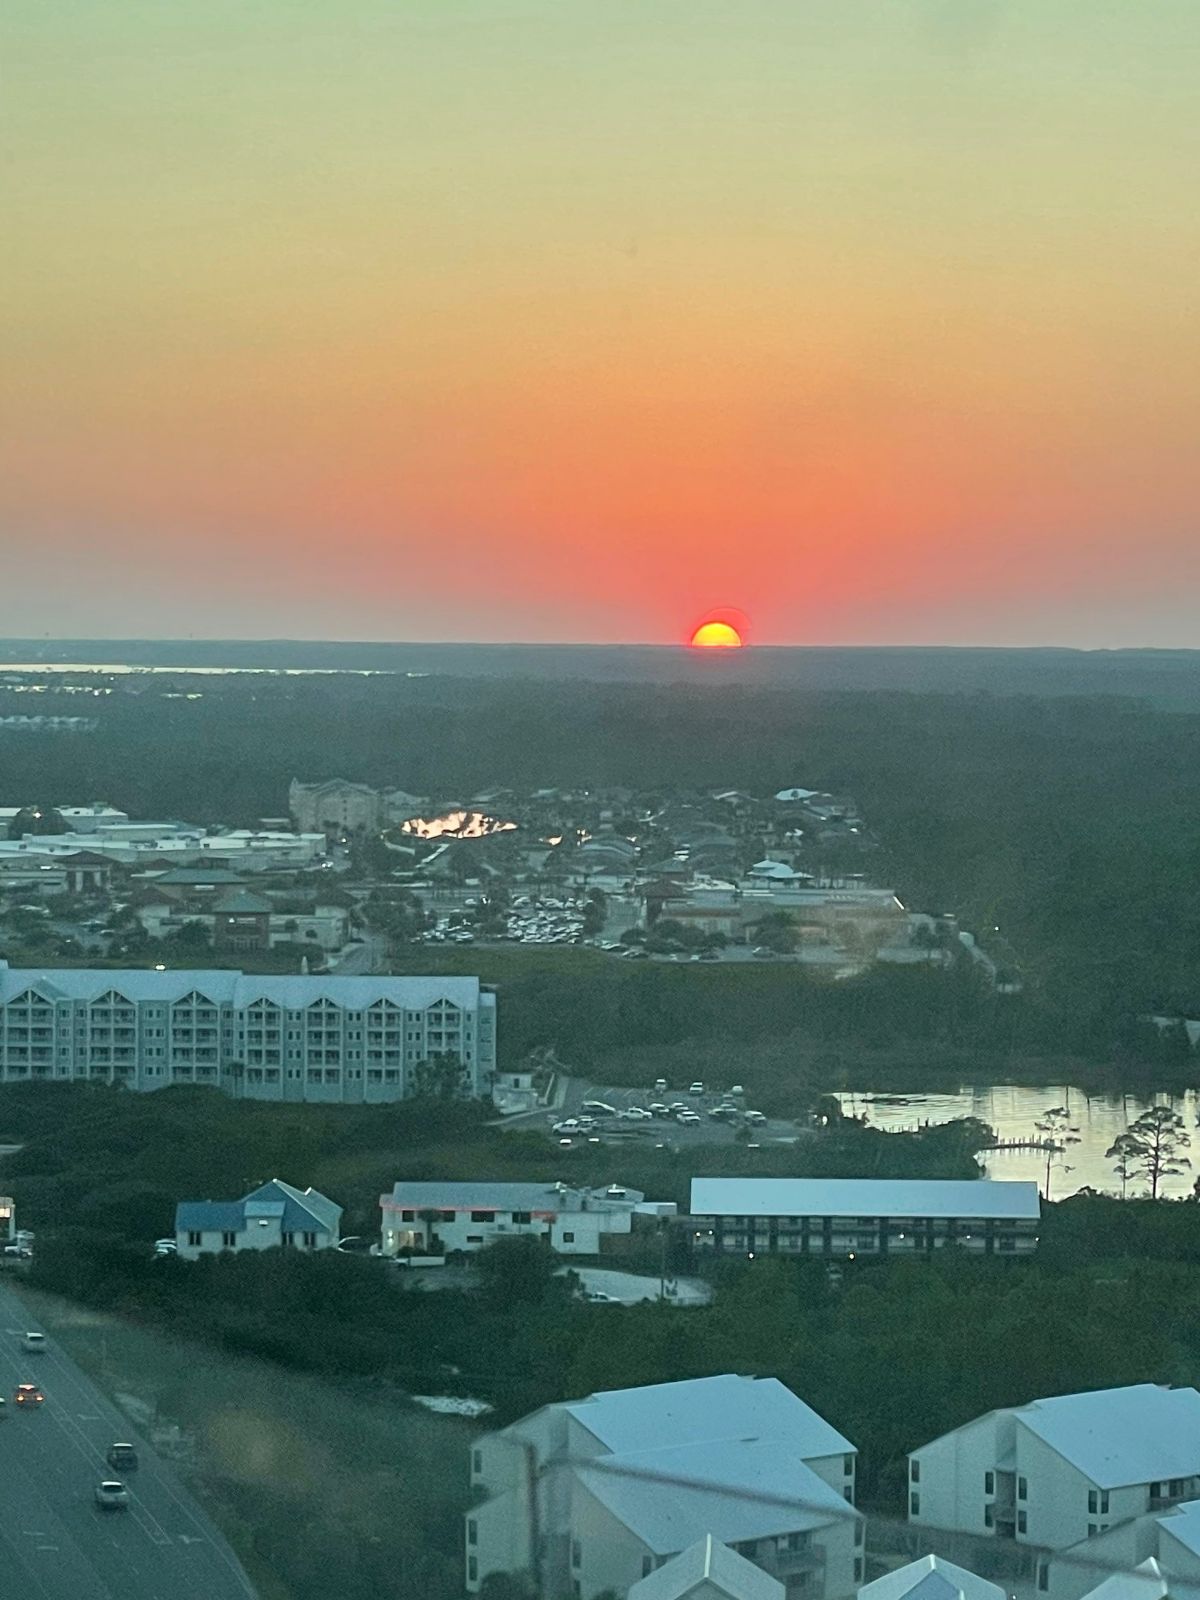 Sunset view over Orange Beach from the elevator at Turquoise Place.